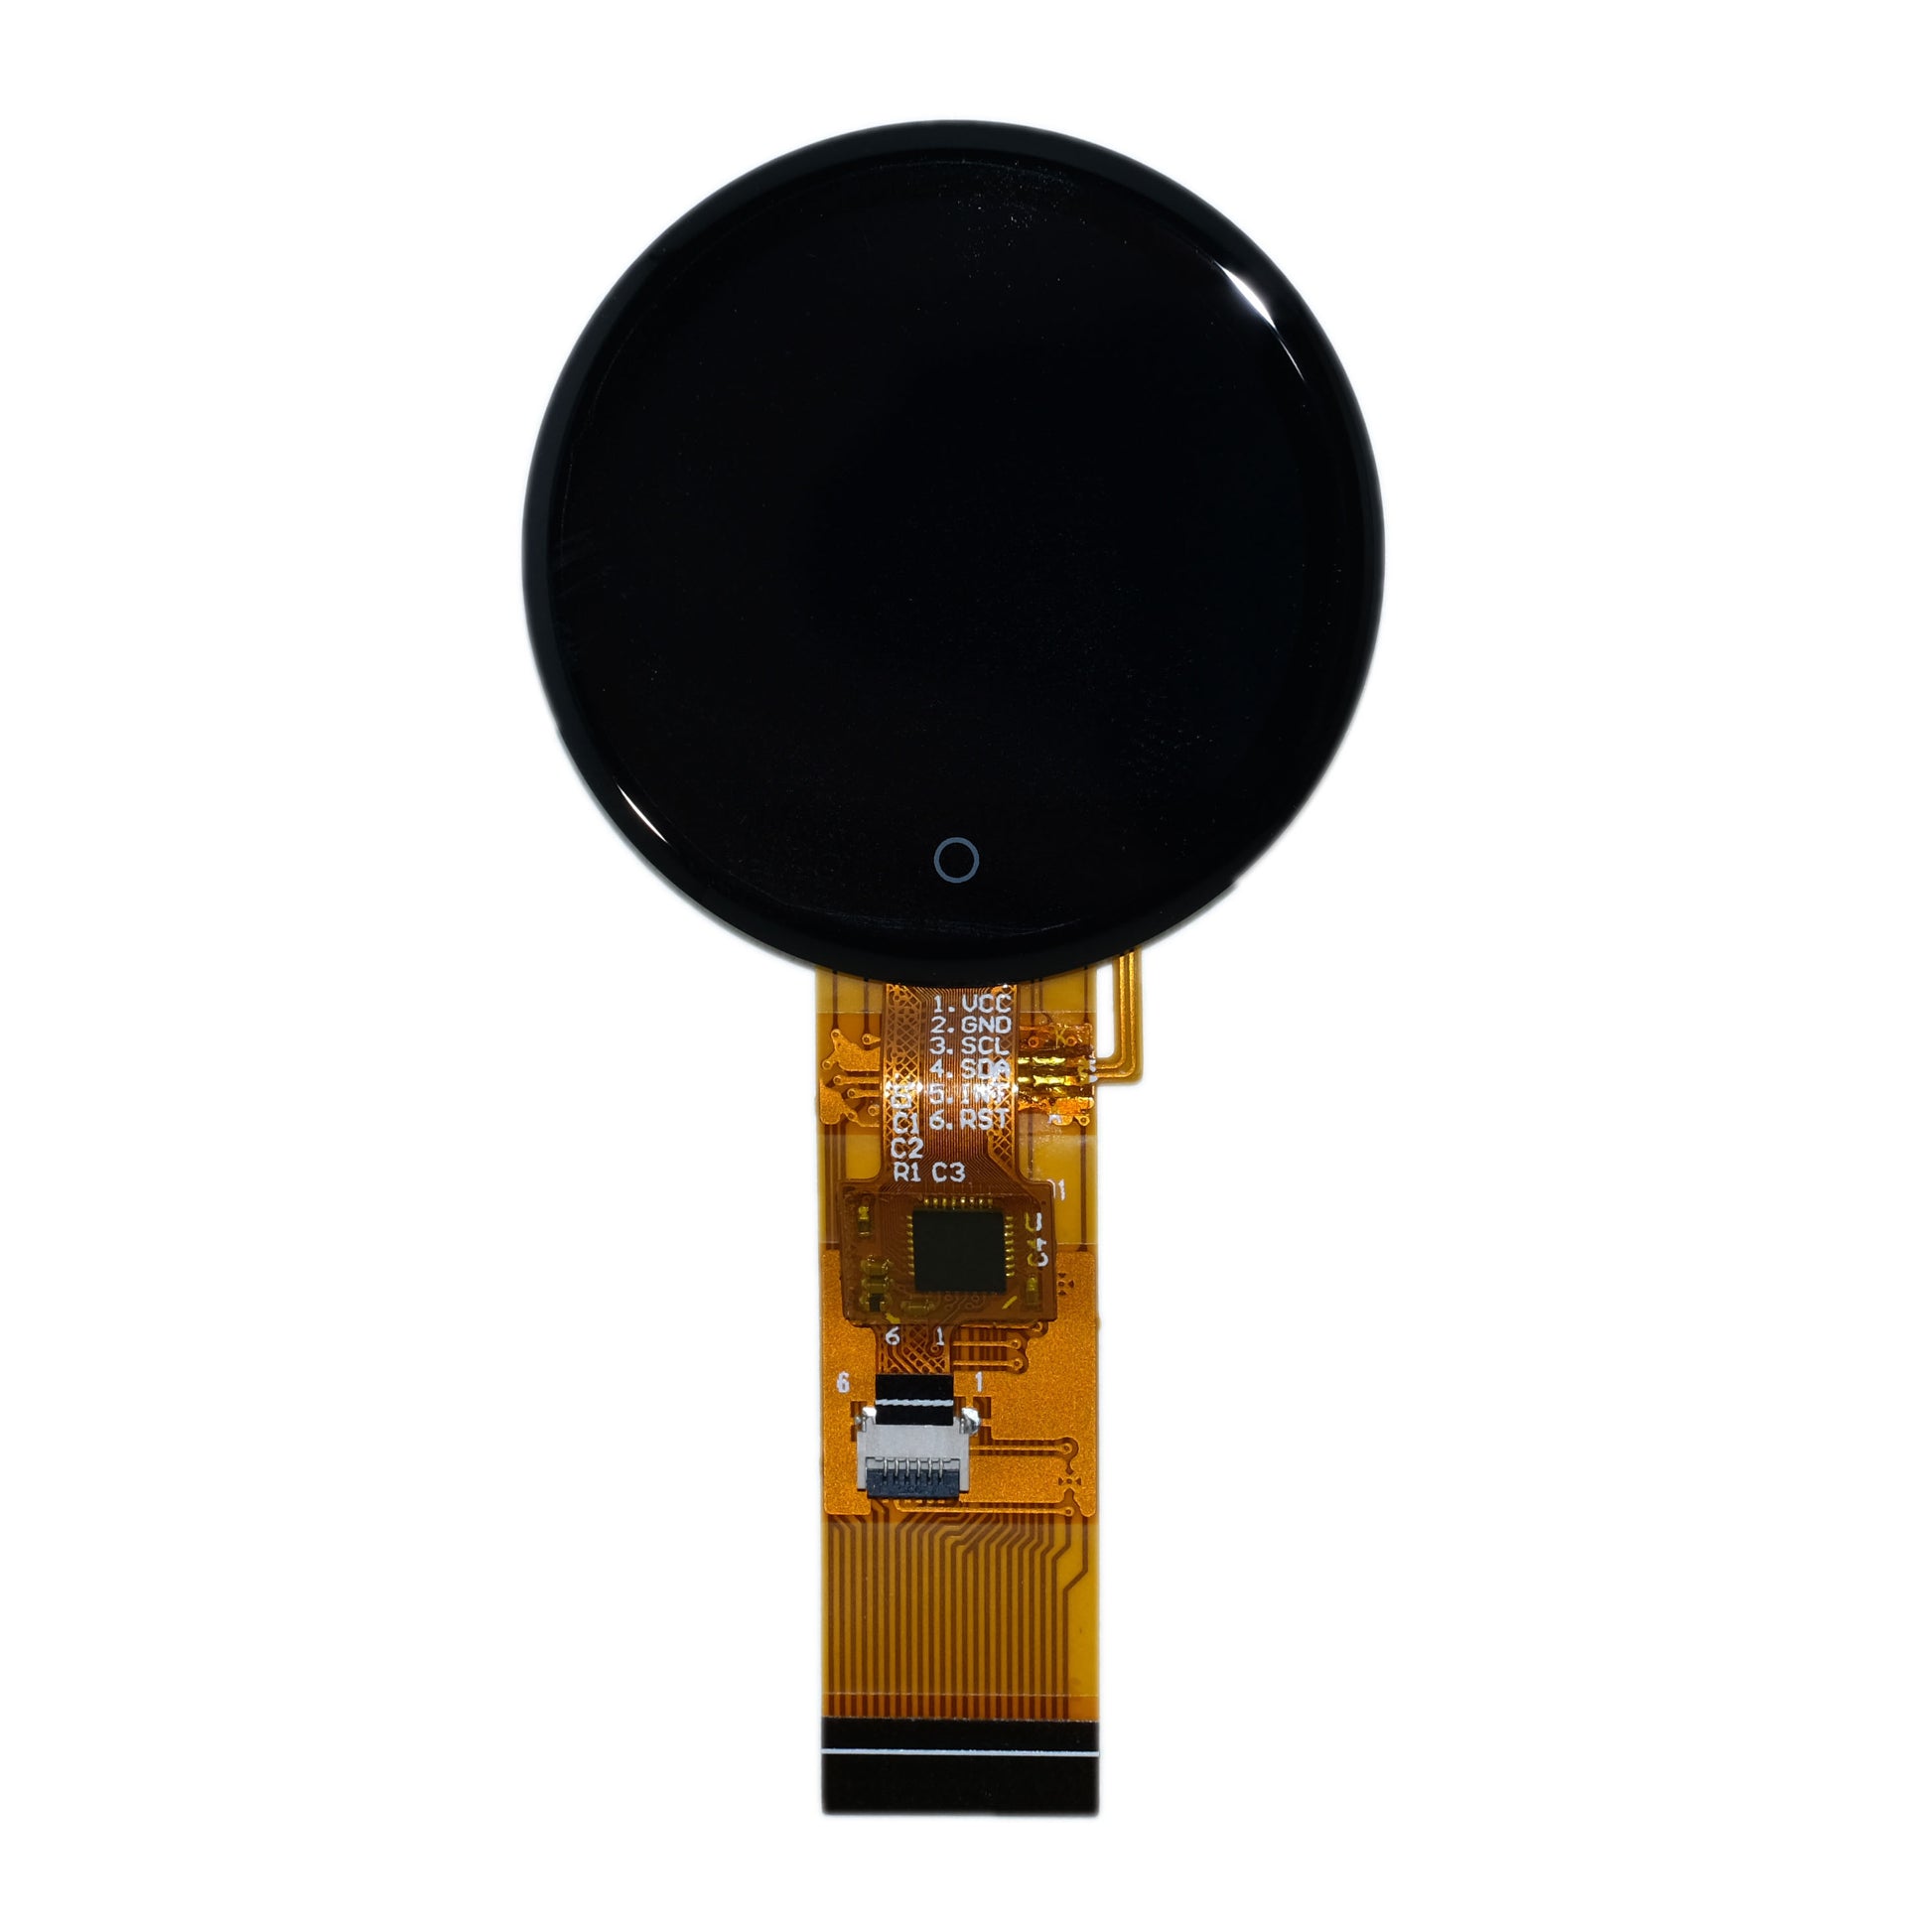 1.22-inch Round TFT Display Panel with 240x240 resolution and capacitive touch capabilities